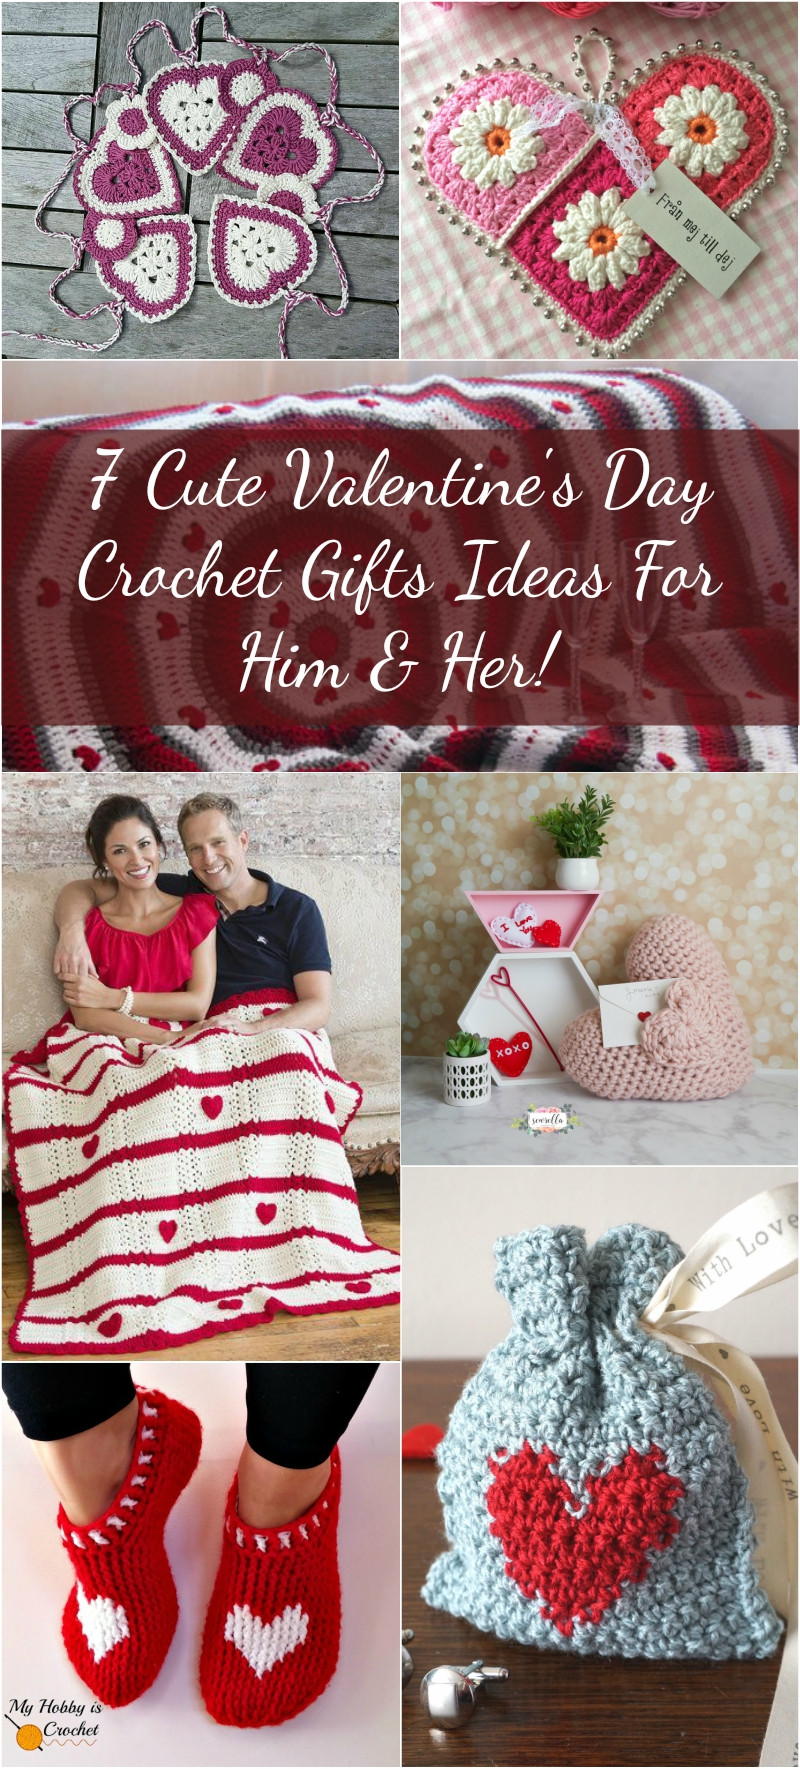 Gift Ideas For Valentines Day For Her
 7 Cute Valentine s Day Crochet Gifts Ideas For Him & Her